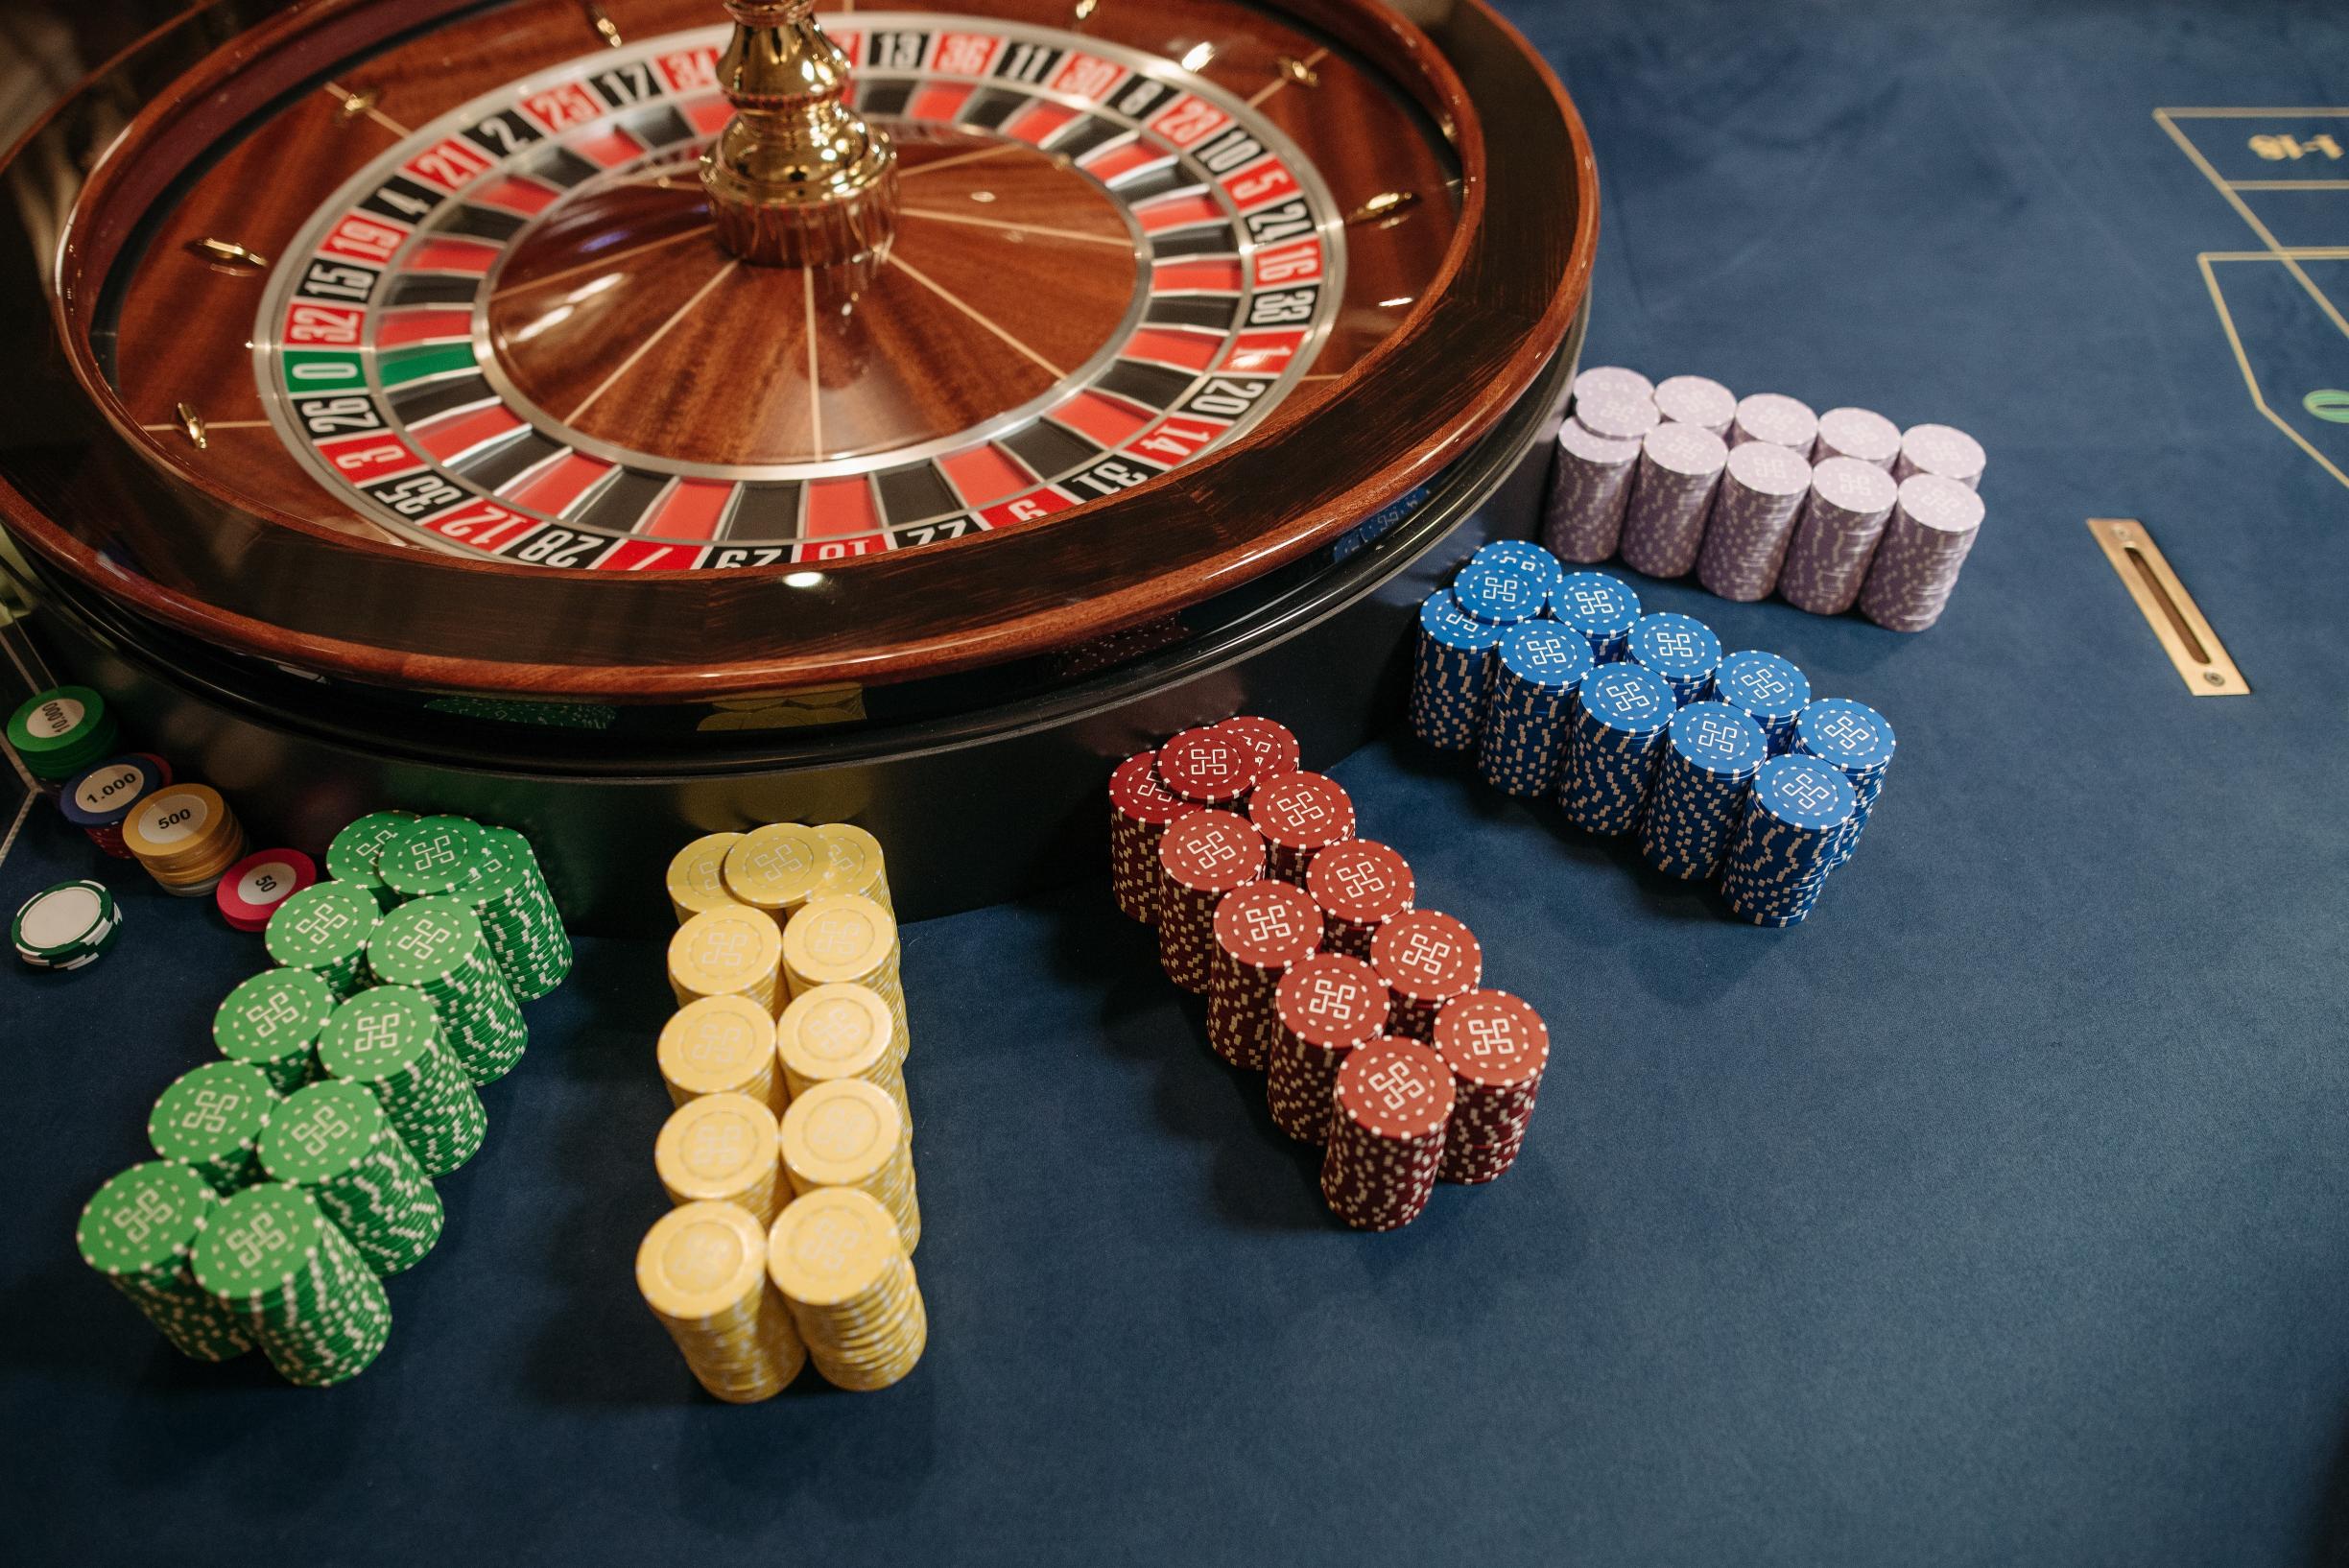 From Bond to Ocean’s Eleven: The Role of Casinos in Pop Culture.